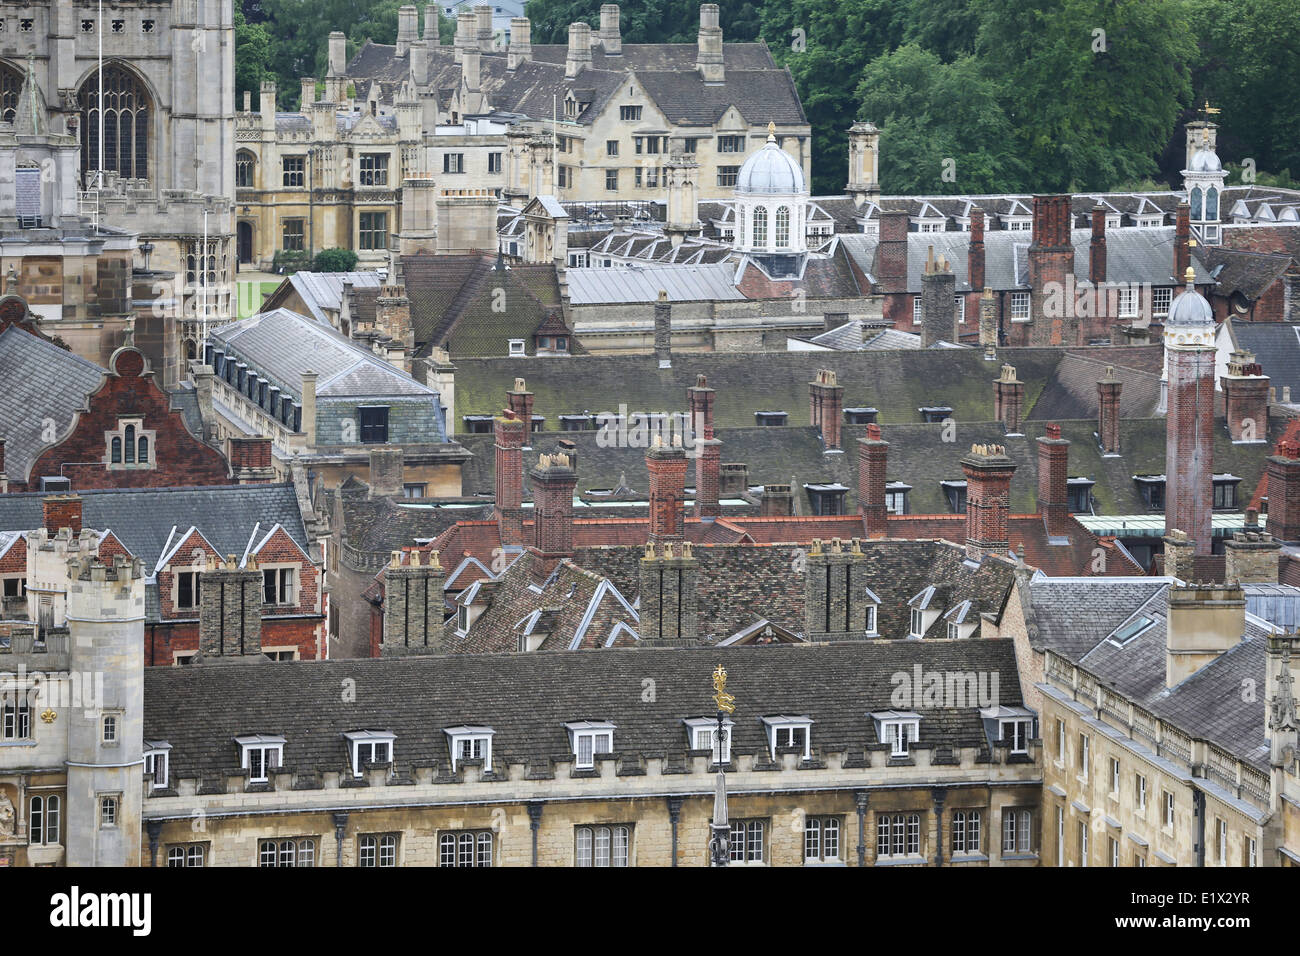 THE CITY OF CAMBRIDGE UNIVERSITY ROOFTOPS AND SPIRES Stock Photo